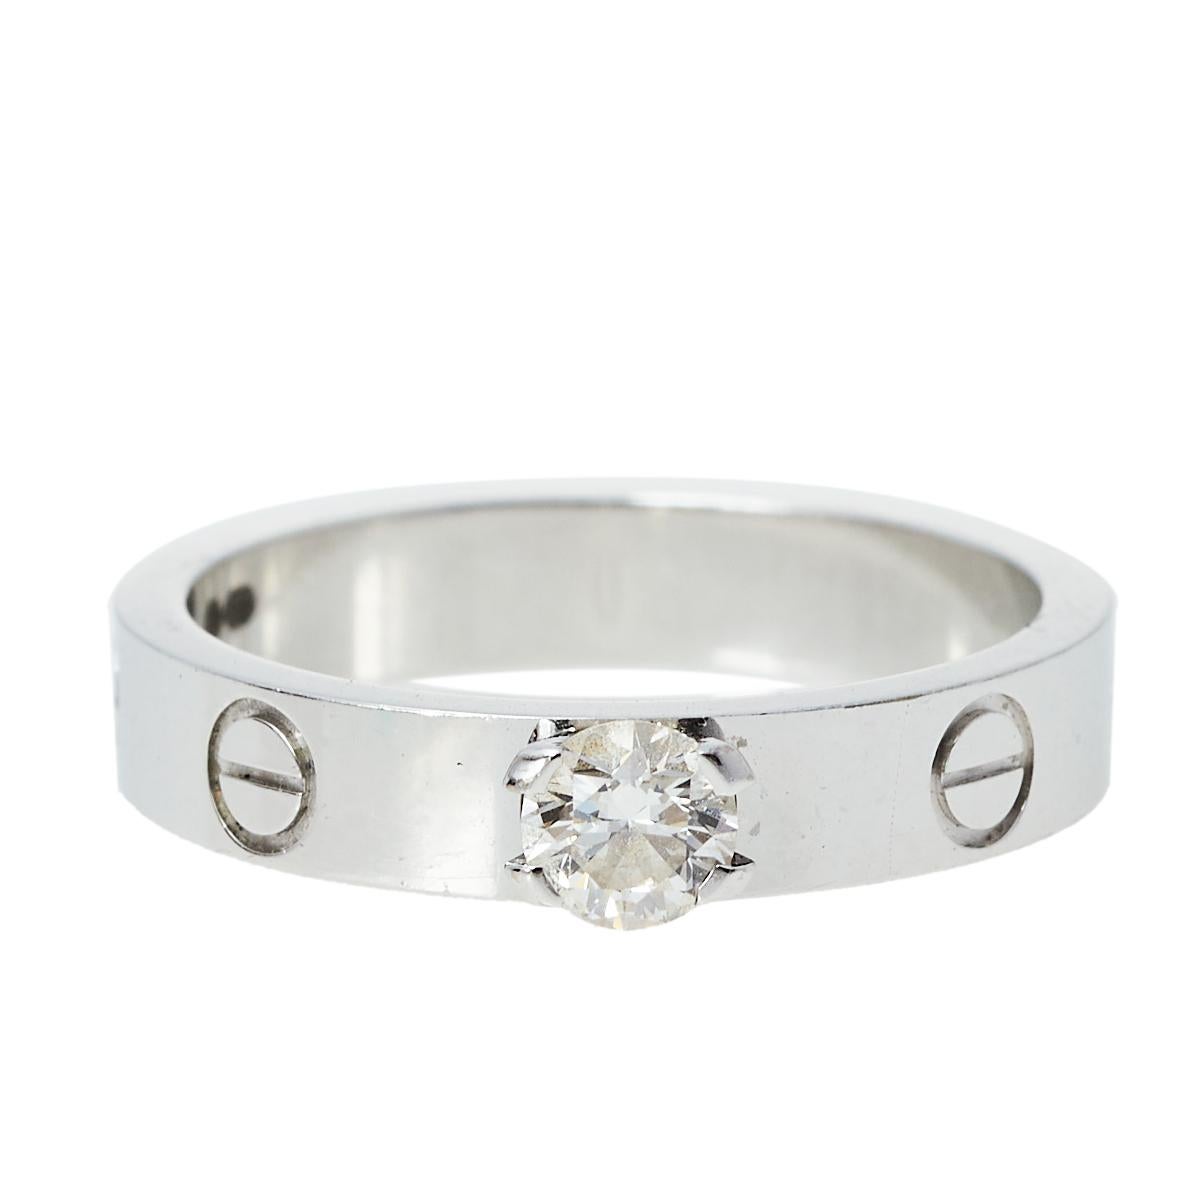 One of the most iconic and loved designs from the house of Cartier, the stunning Love ring is an icon of style and luxury. Constructed in 18K white gold, this Love Solitaire ring features the signature screw details all around the surface and is